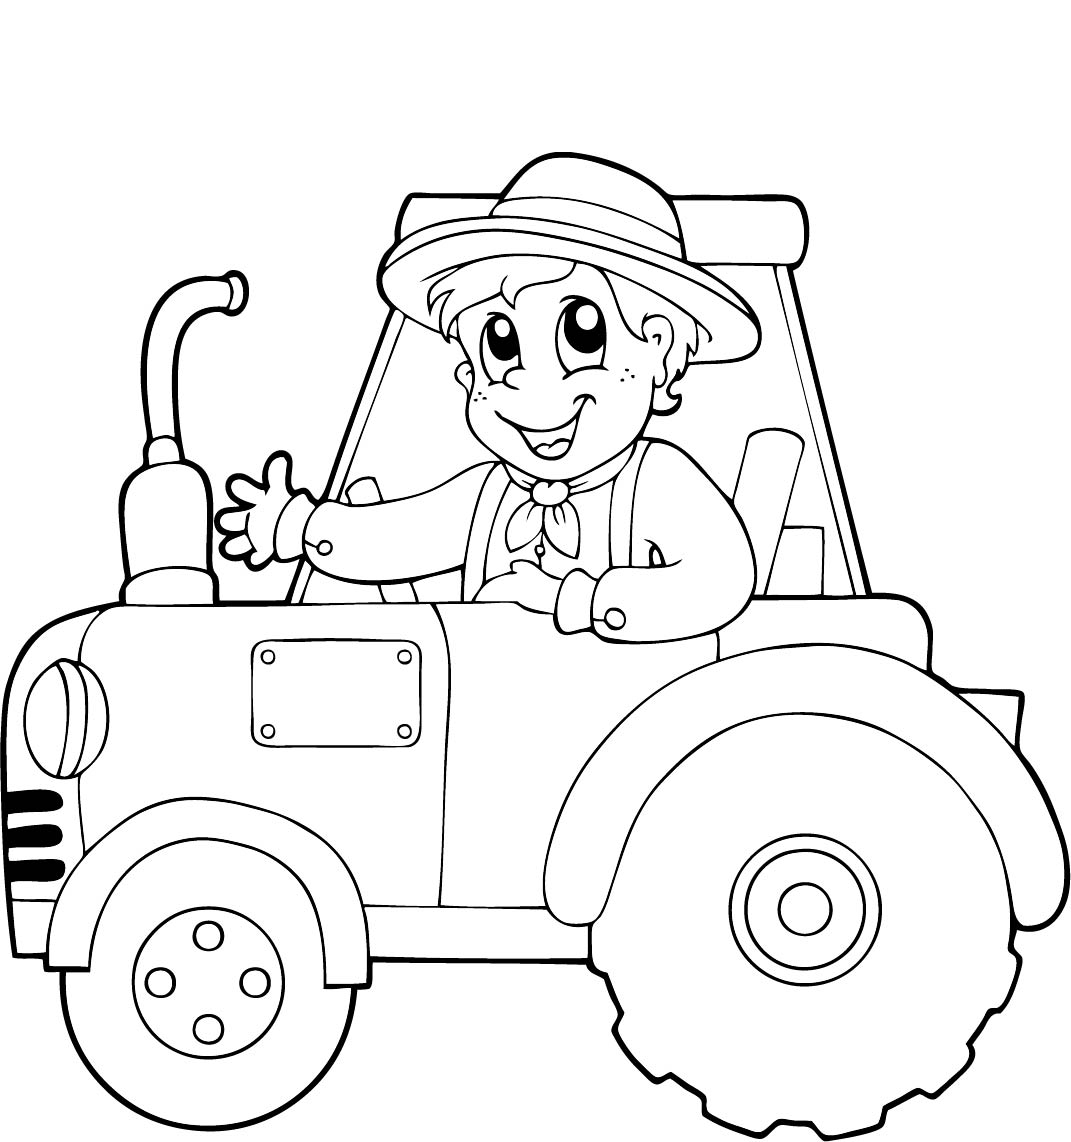 Coloring Book Farmer On Tractor Online Coloring Page - vrogue.co